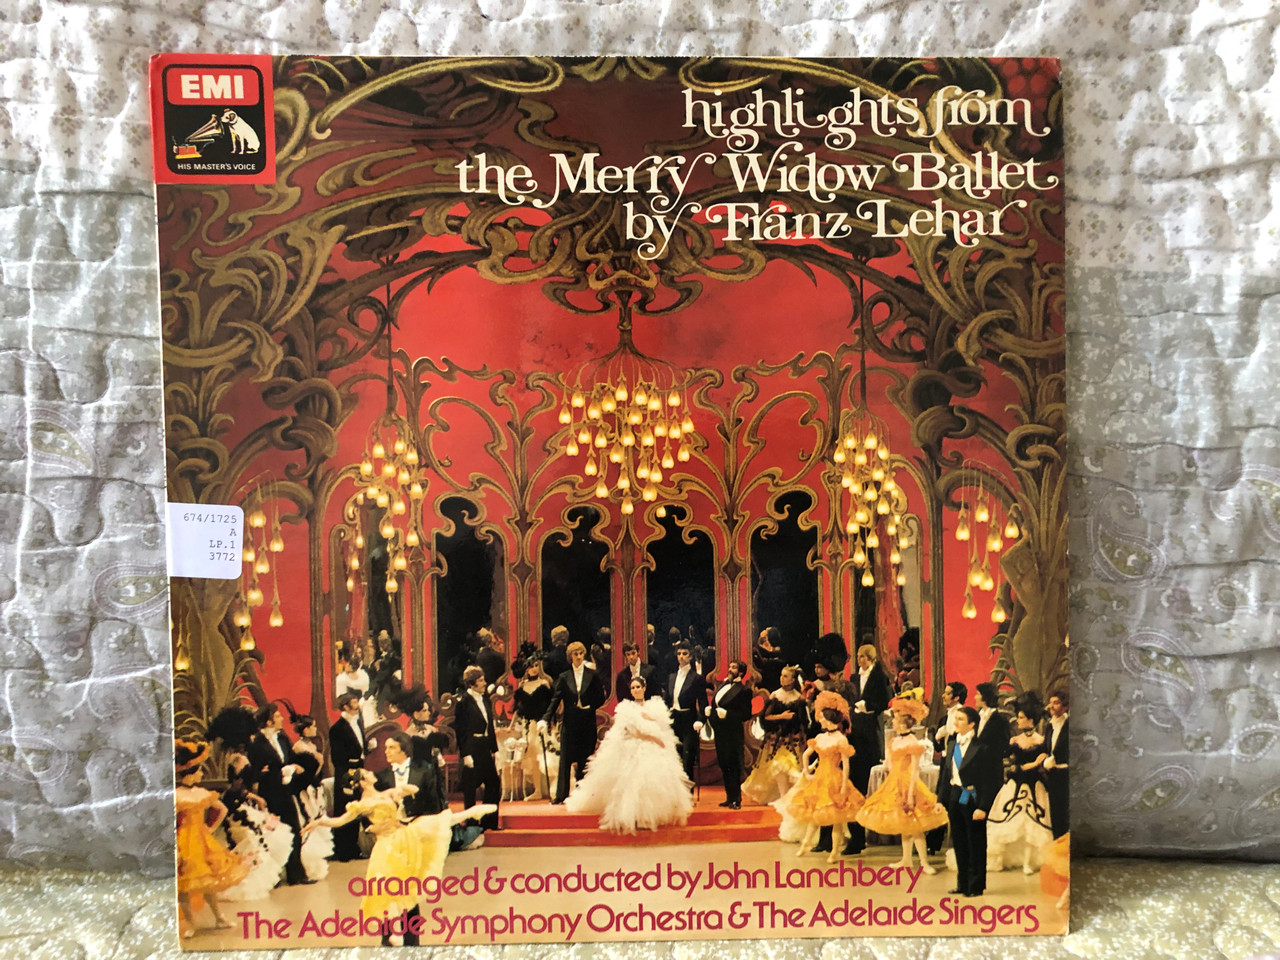 https://cdn10.bigcommerce.com/s-62bdpkt7pb/products/0/images/273038/Highlights_From_The_Merry_Widow_Ballet_by_Franz_Lehr_-_arranged_conducted_by_John_Lanchbery_The_Adelaide_Symphony_Orchestra_The_Adelaide_Singers_His_Masters_Voice_LP_1976_Stereo_CSD_3772_1__99342.1681969685.1280.1280.JPG?c=2&_gl=1*1f3vg4b*_ga*MjA2NTIxMjE2MC4xNTkwNTEyNTMy*_ga_WS2VZYPC6G*MTY4MTk2MzMzNC44NTcuMS4xNjgxOTY5NzA4LjYwLjAuMA..